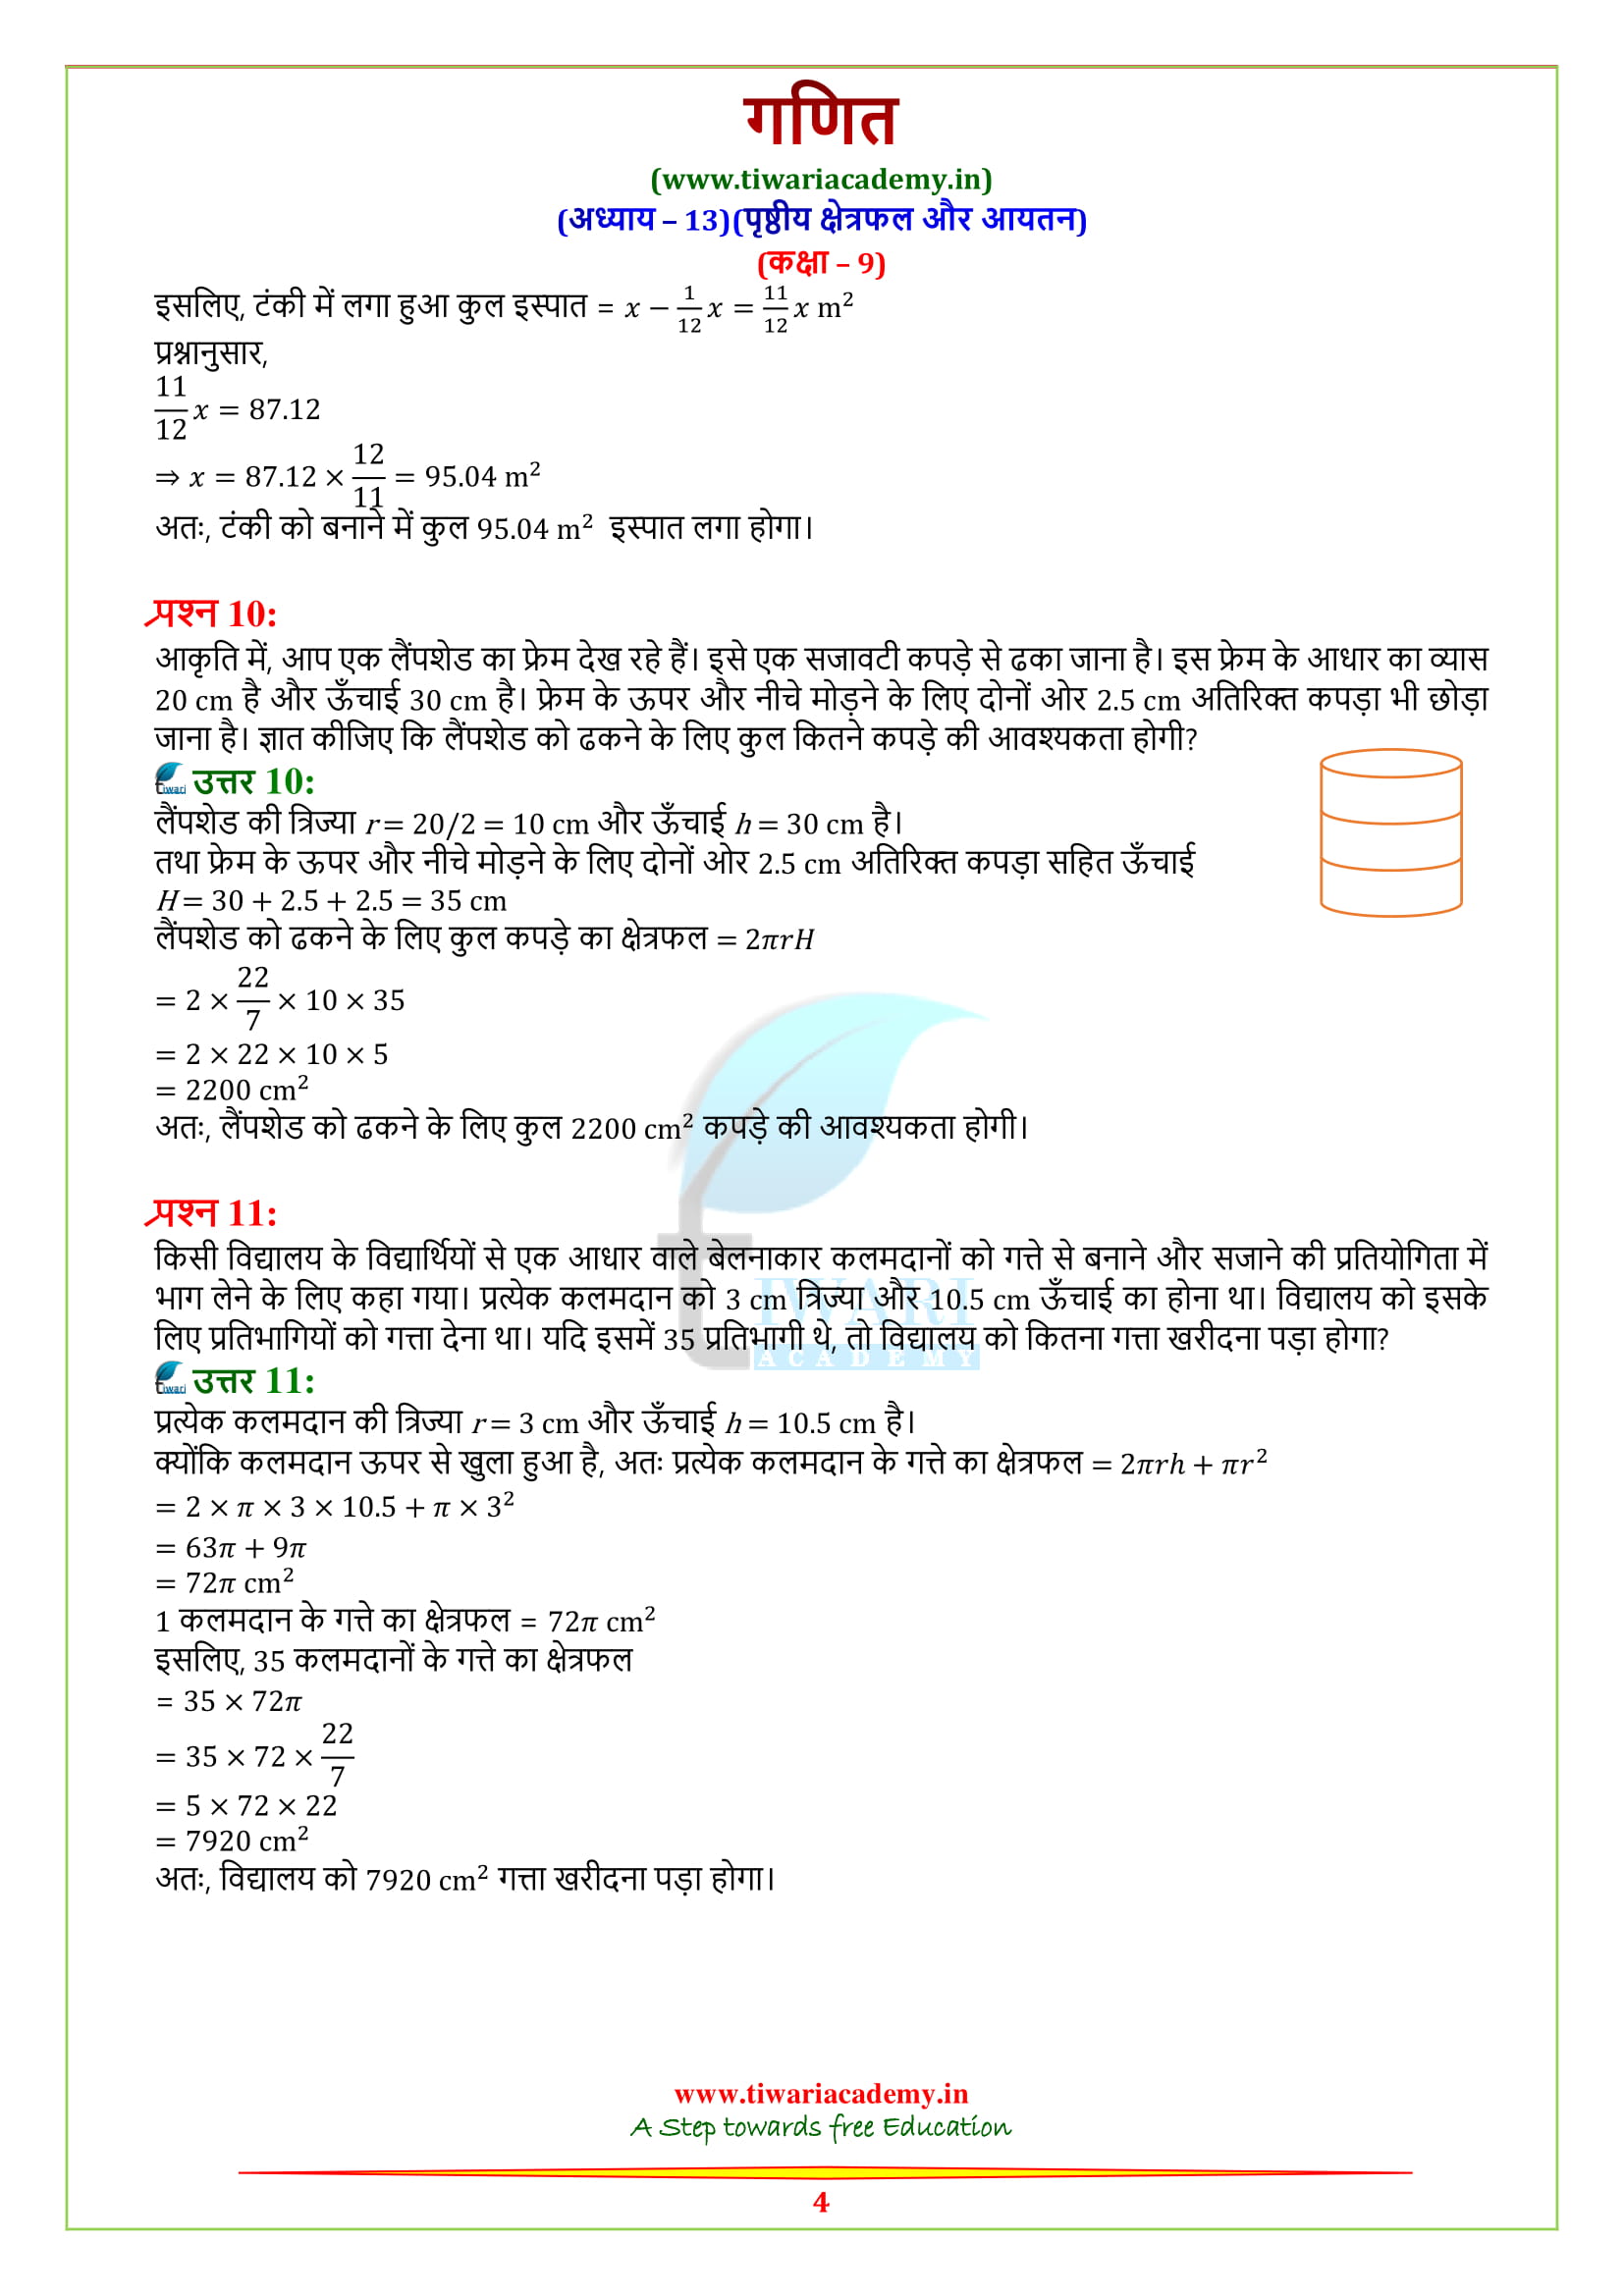 NCERT Solutions for class 9 Exercise 13.2 for high school mp, up board